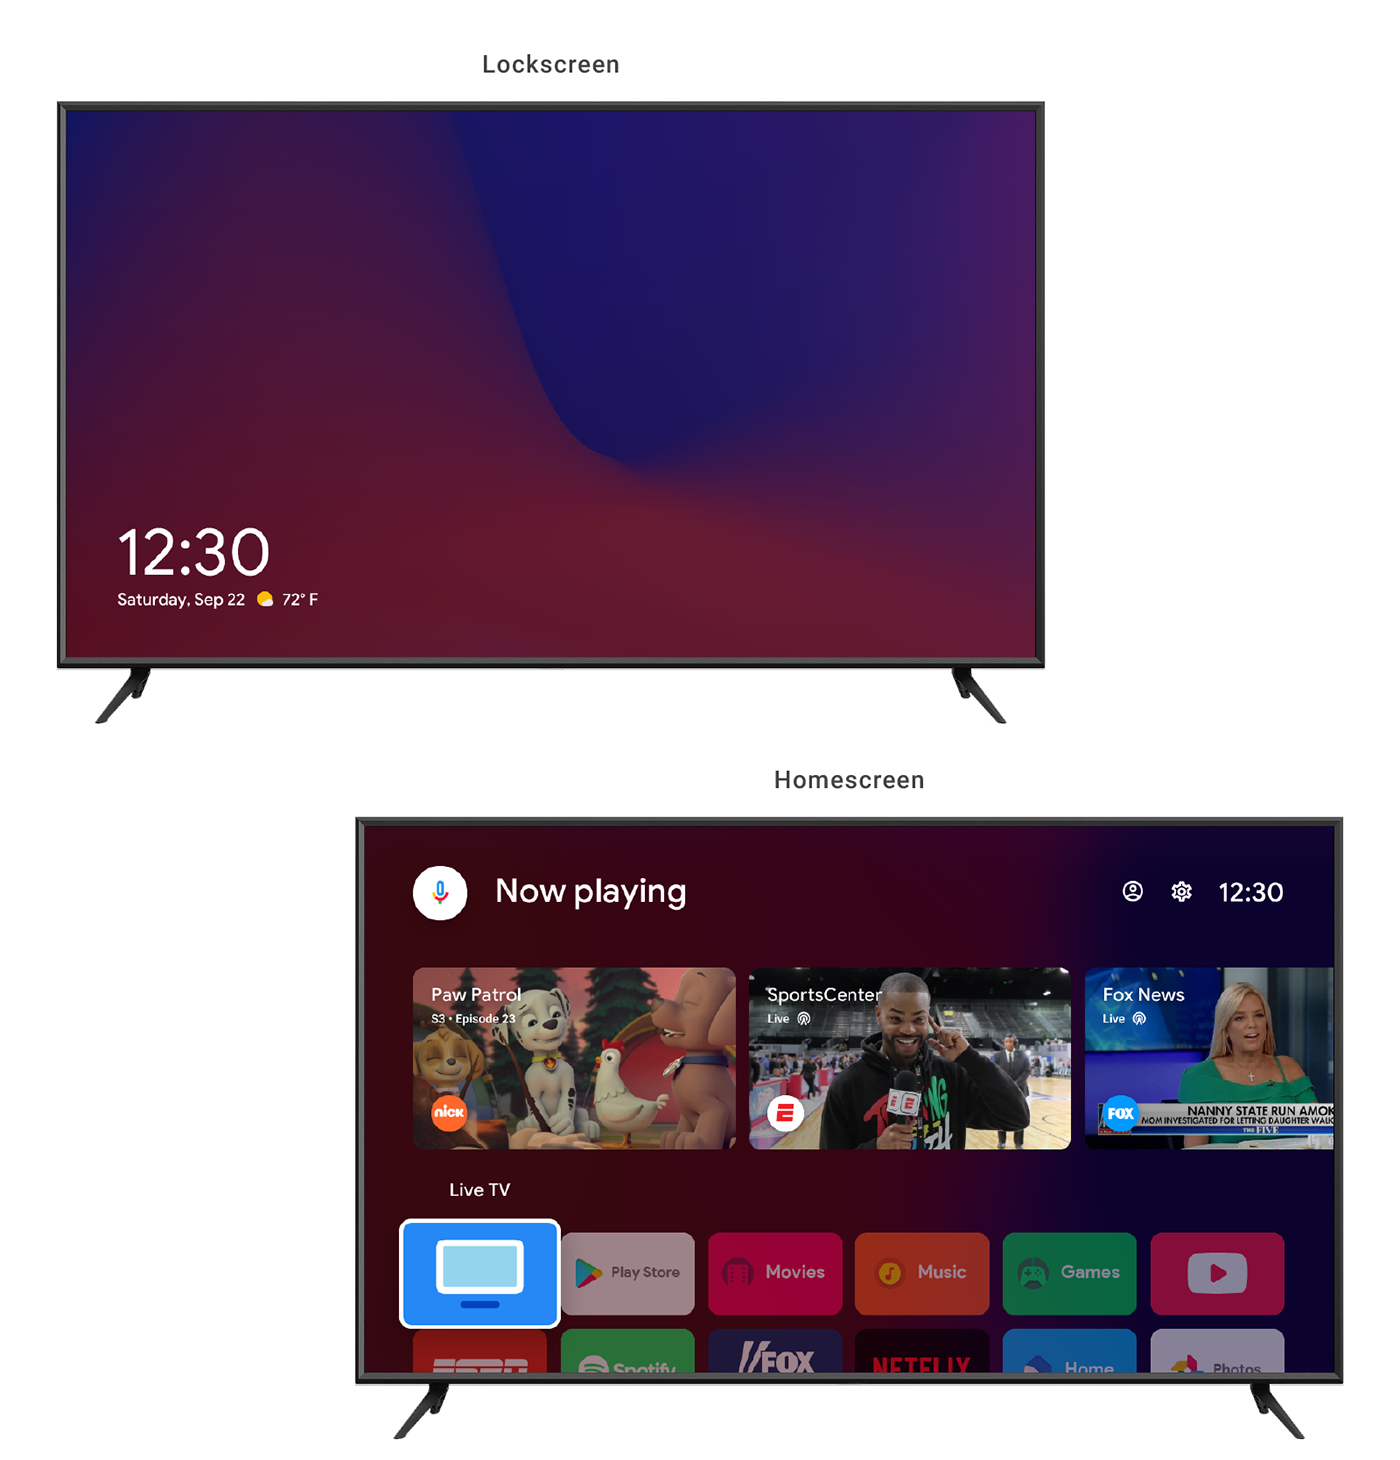 android google redesign concept material design tv Android Wear Android TV pixel 2 adaptive icons